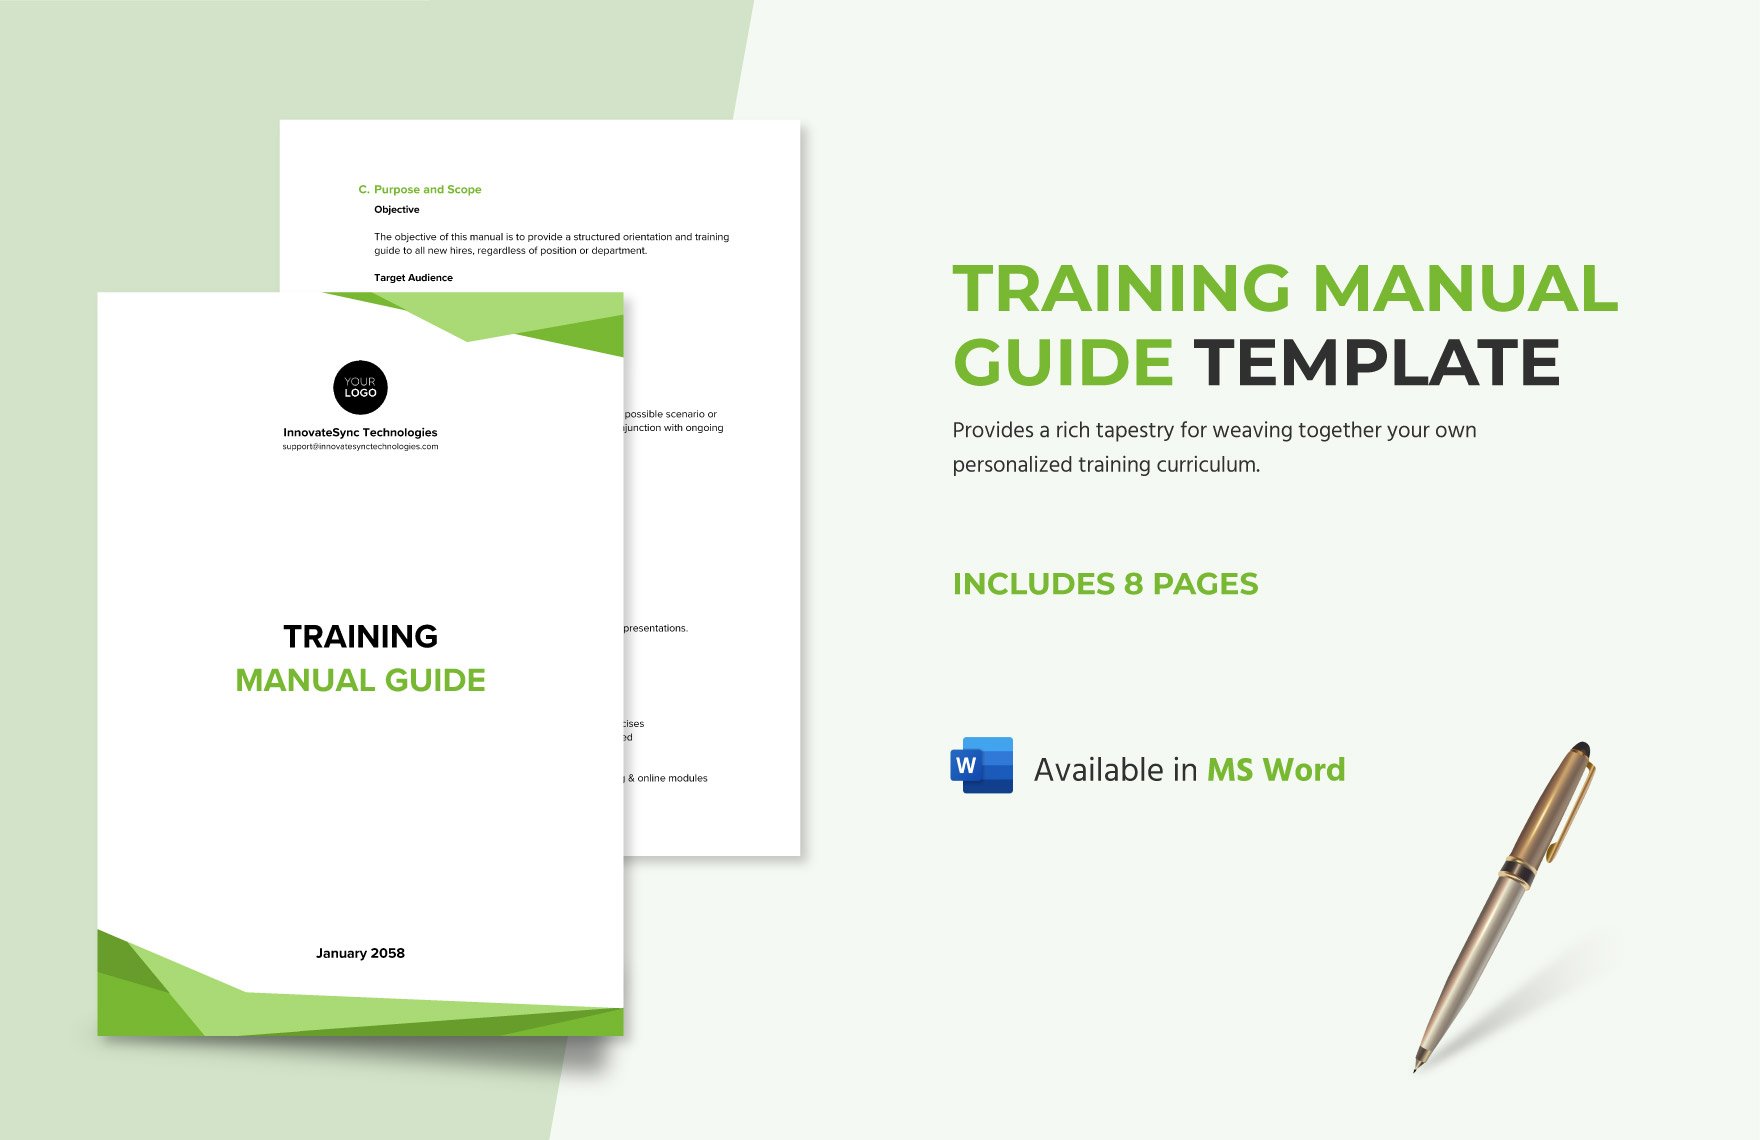 Free Training Manual Guide Template